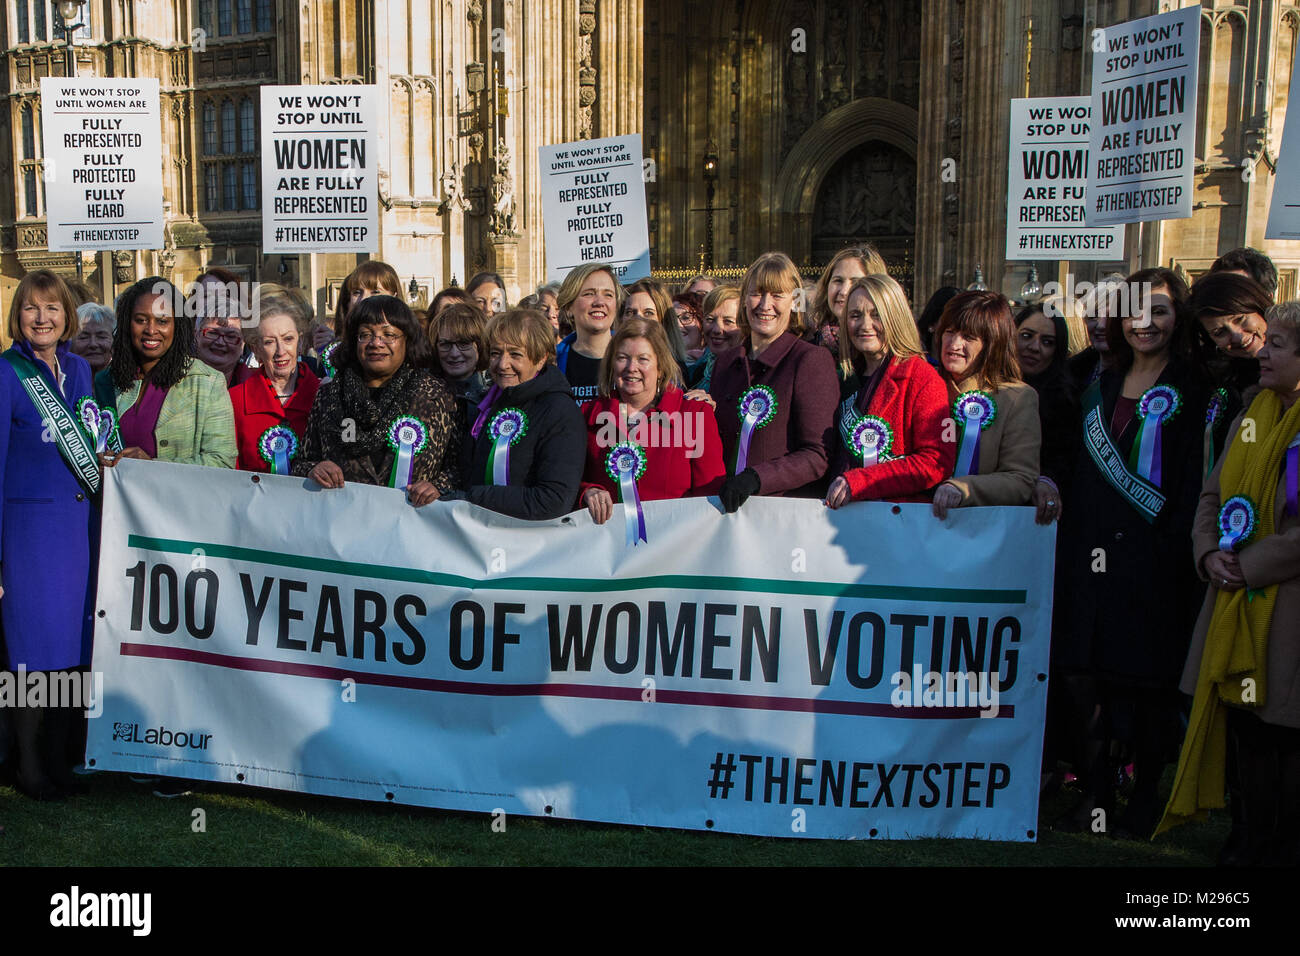 London, UK. 6th Feb, 2018. Female Labour MPs celebrate the centenary of women's suffrage outside the Palace of Westminster. The Representation of the People Act was passed on 6th February 1918 and gave women aged over 30 and 'of property' the right to vote. Credit: Mark Kerrison/Alamy Live News Stock Photo